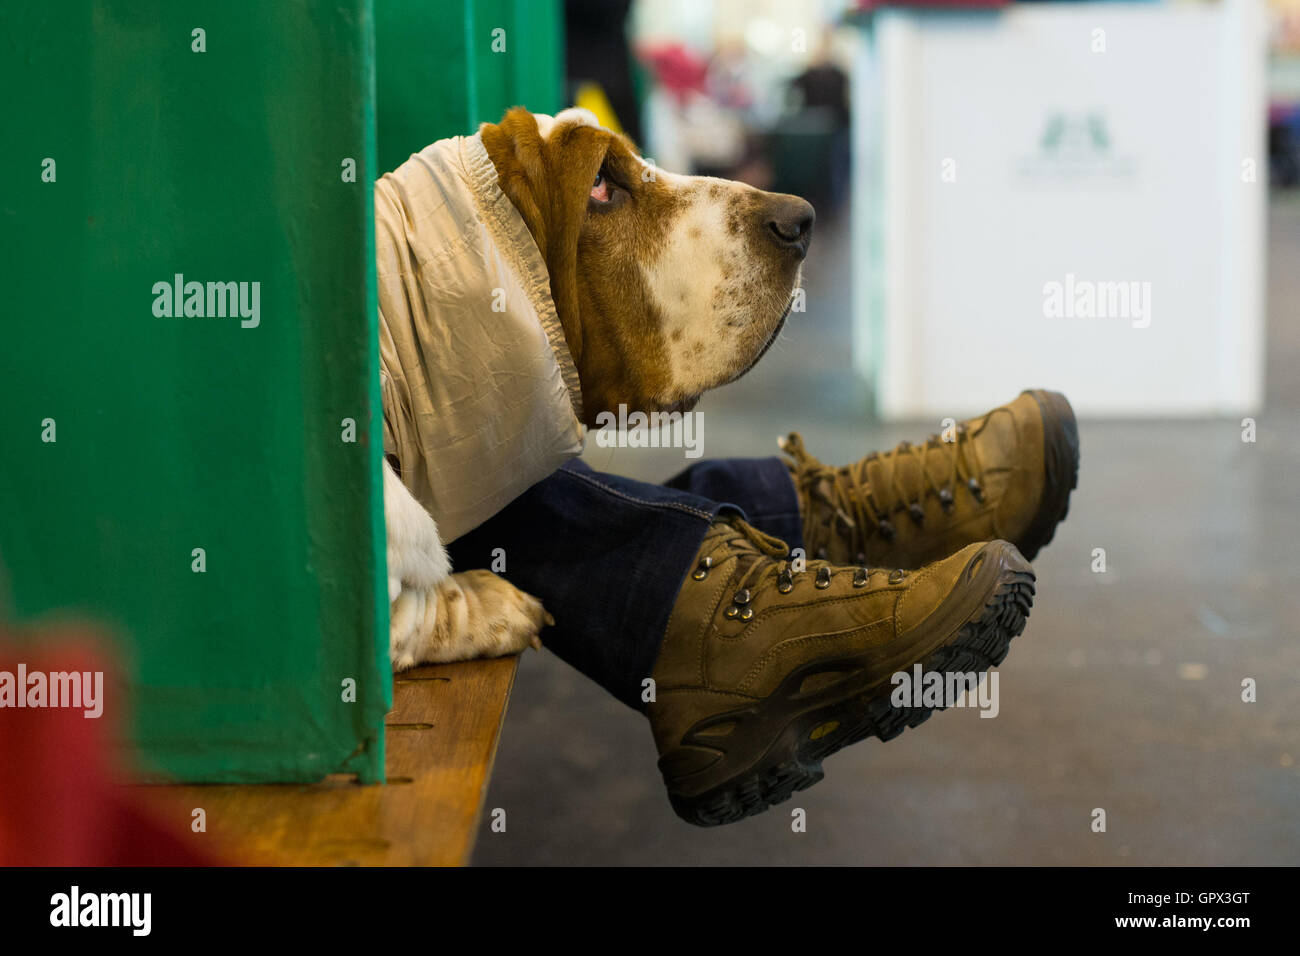 The head of a bloodhound and some legs poke out of a stall at Crufts 2016 held at the NEC in Birmingham, West Midlands, UK. The Stock Photo